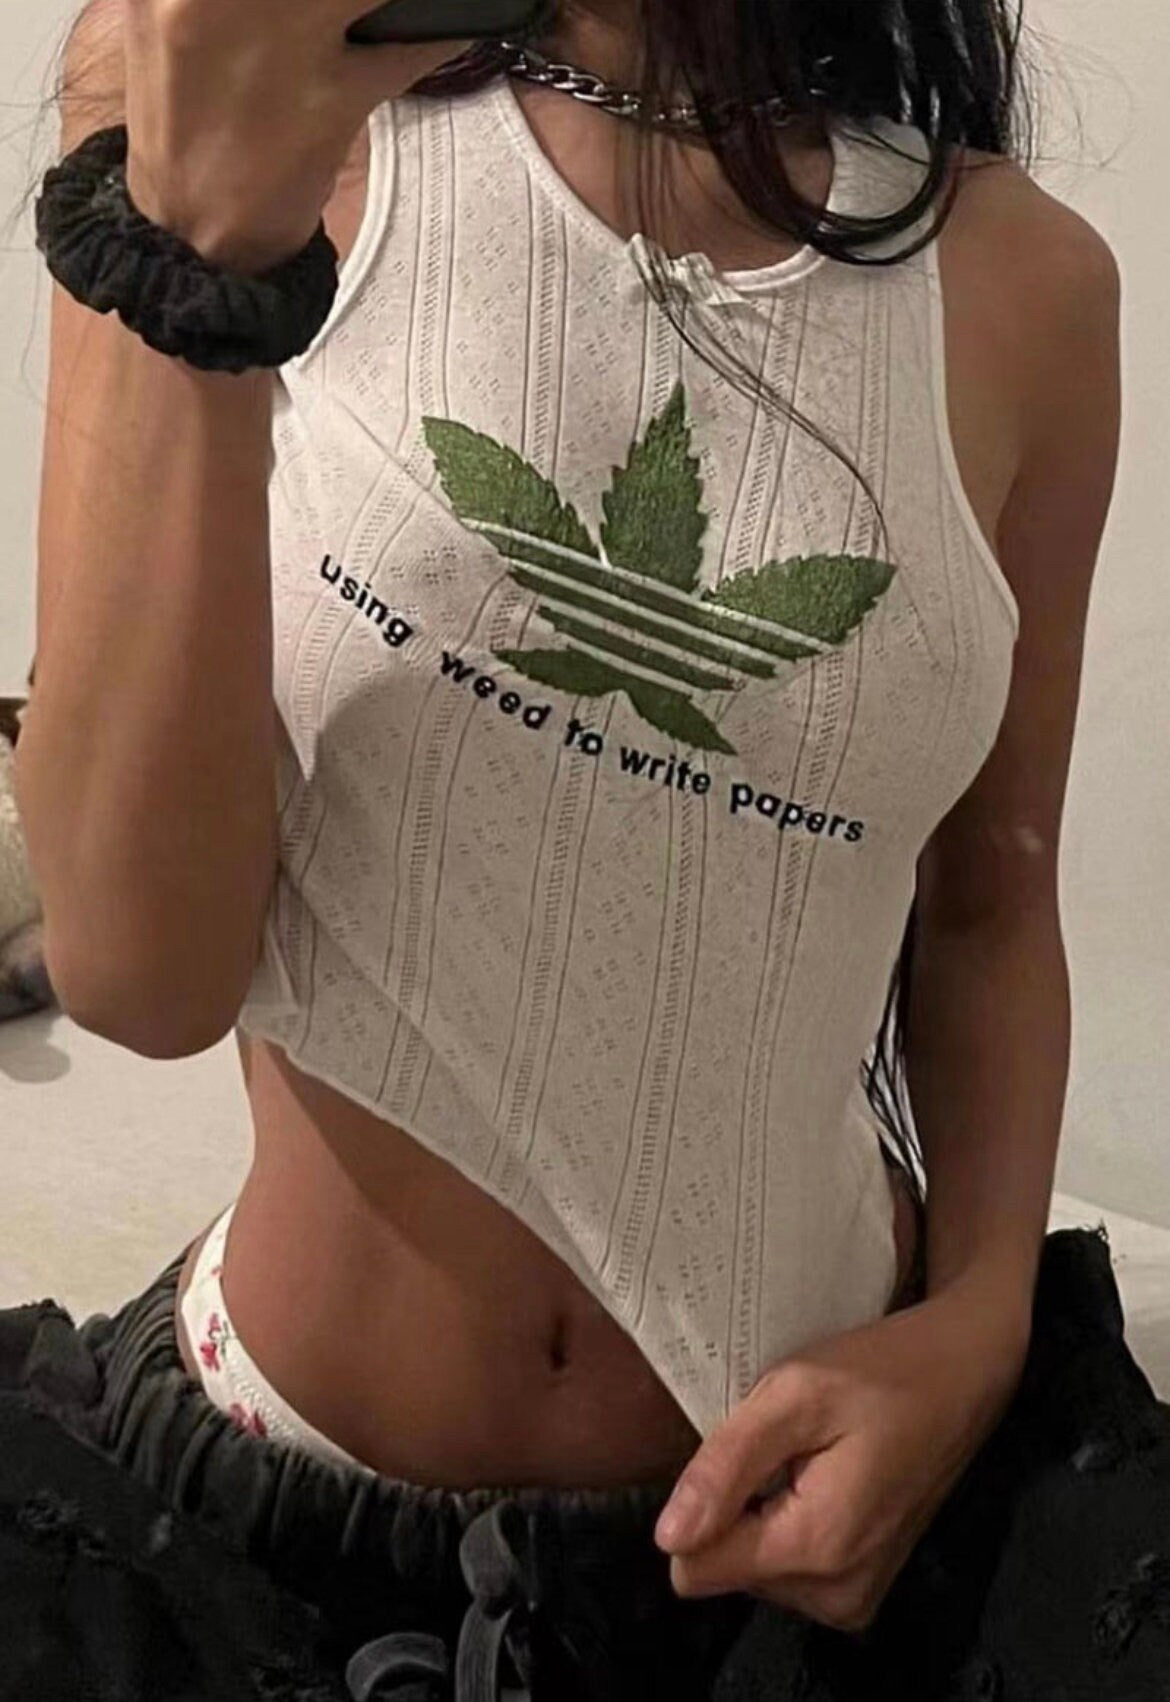 Using Weed To Write Papers Eyelet Tank Top